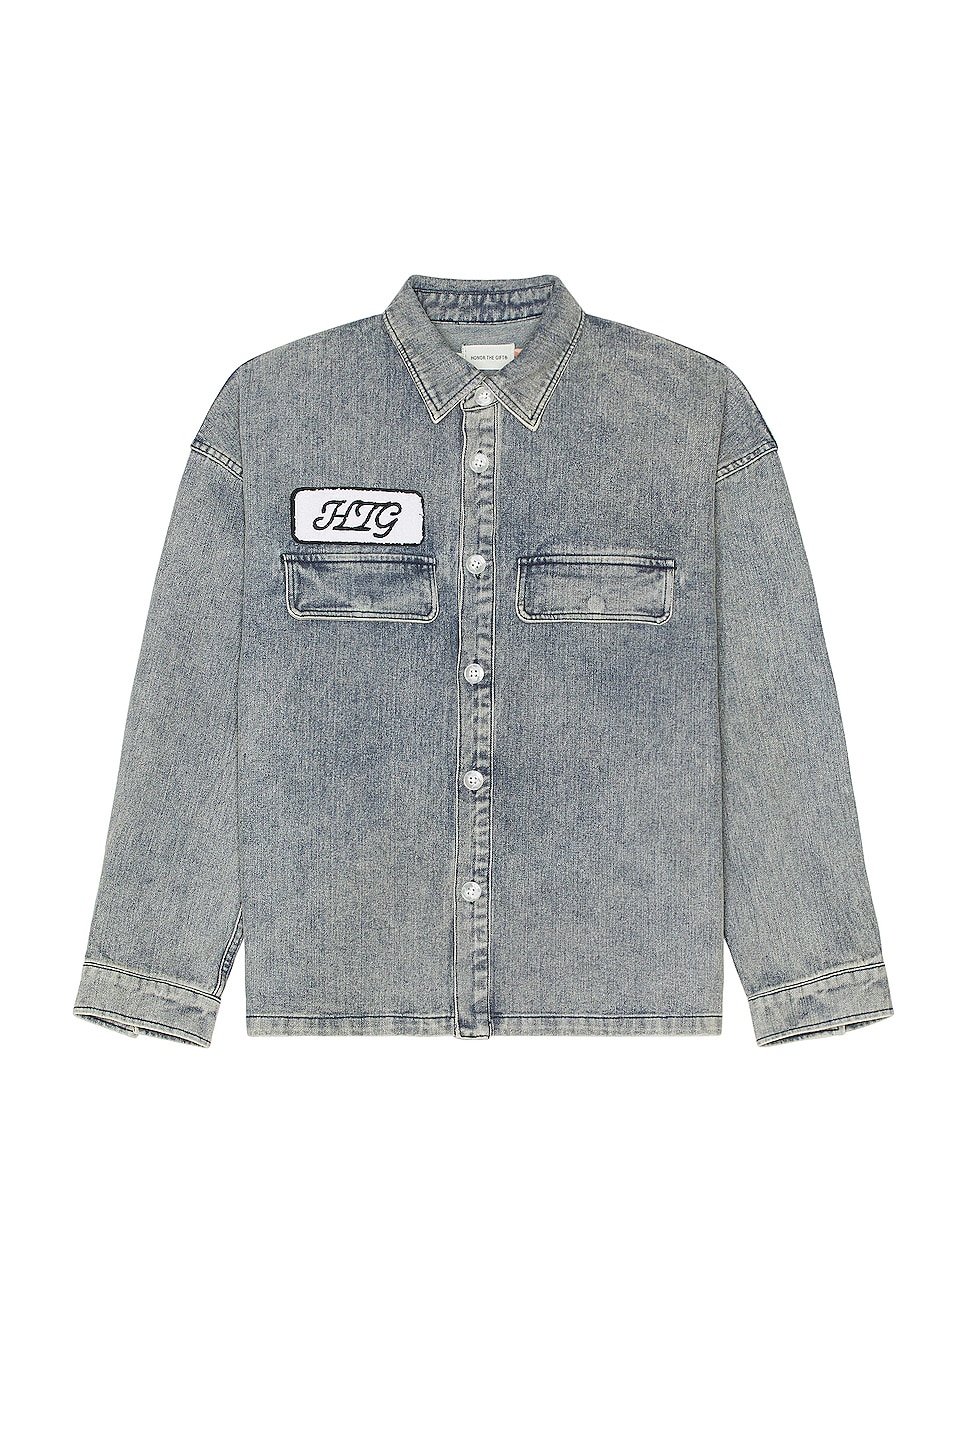 Image 1 of Honor The Gift Long Sleeve Work Shirt in Indigo